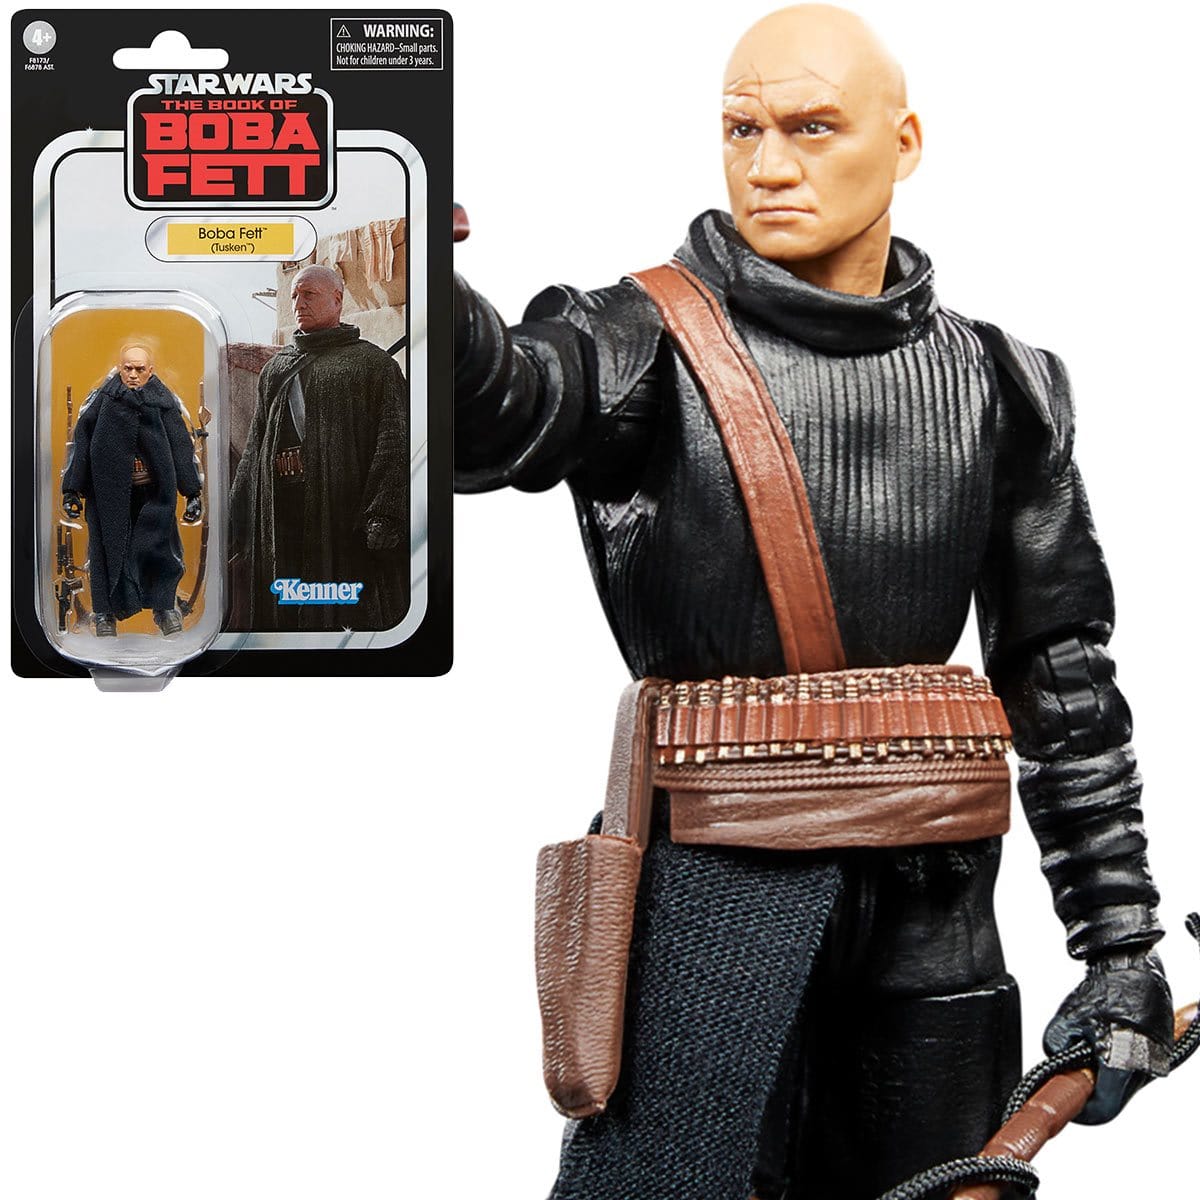 Upcoming Toys and Collectibles